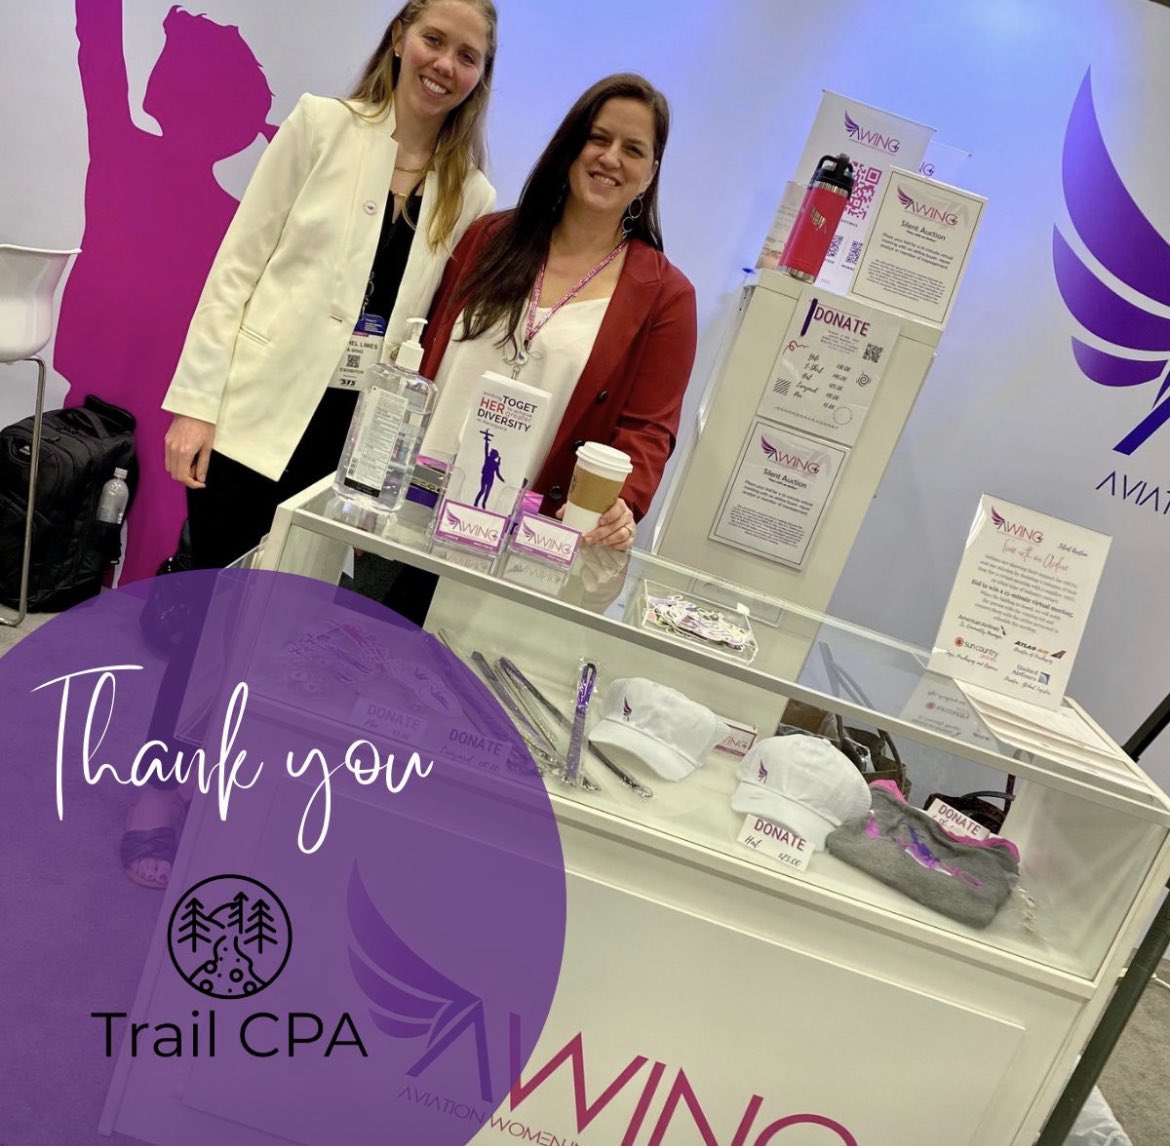 Thank you Trail CPA for handling the financials for our #501c3nonprofit as we work to make our 3rd annual #jobfAIR at #MROAM another huge success!

#Aviation #WomenInAviation #25by25 #DEI